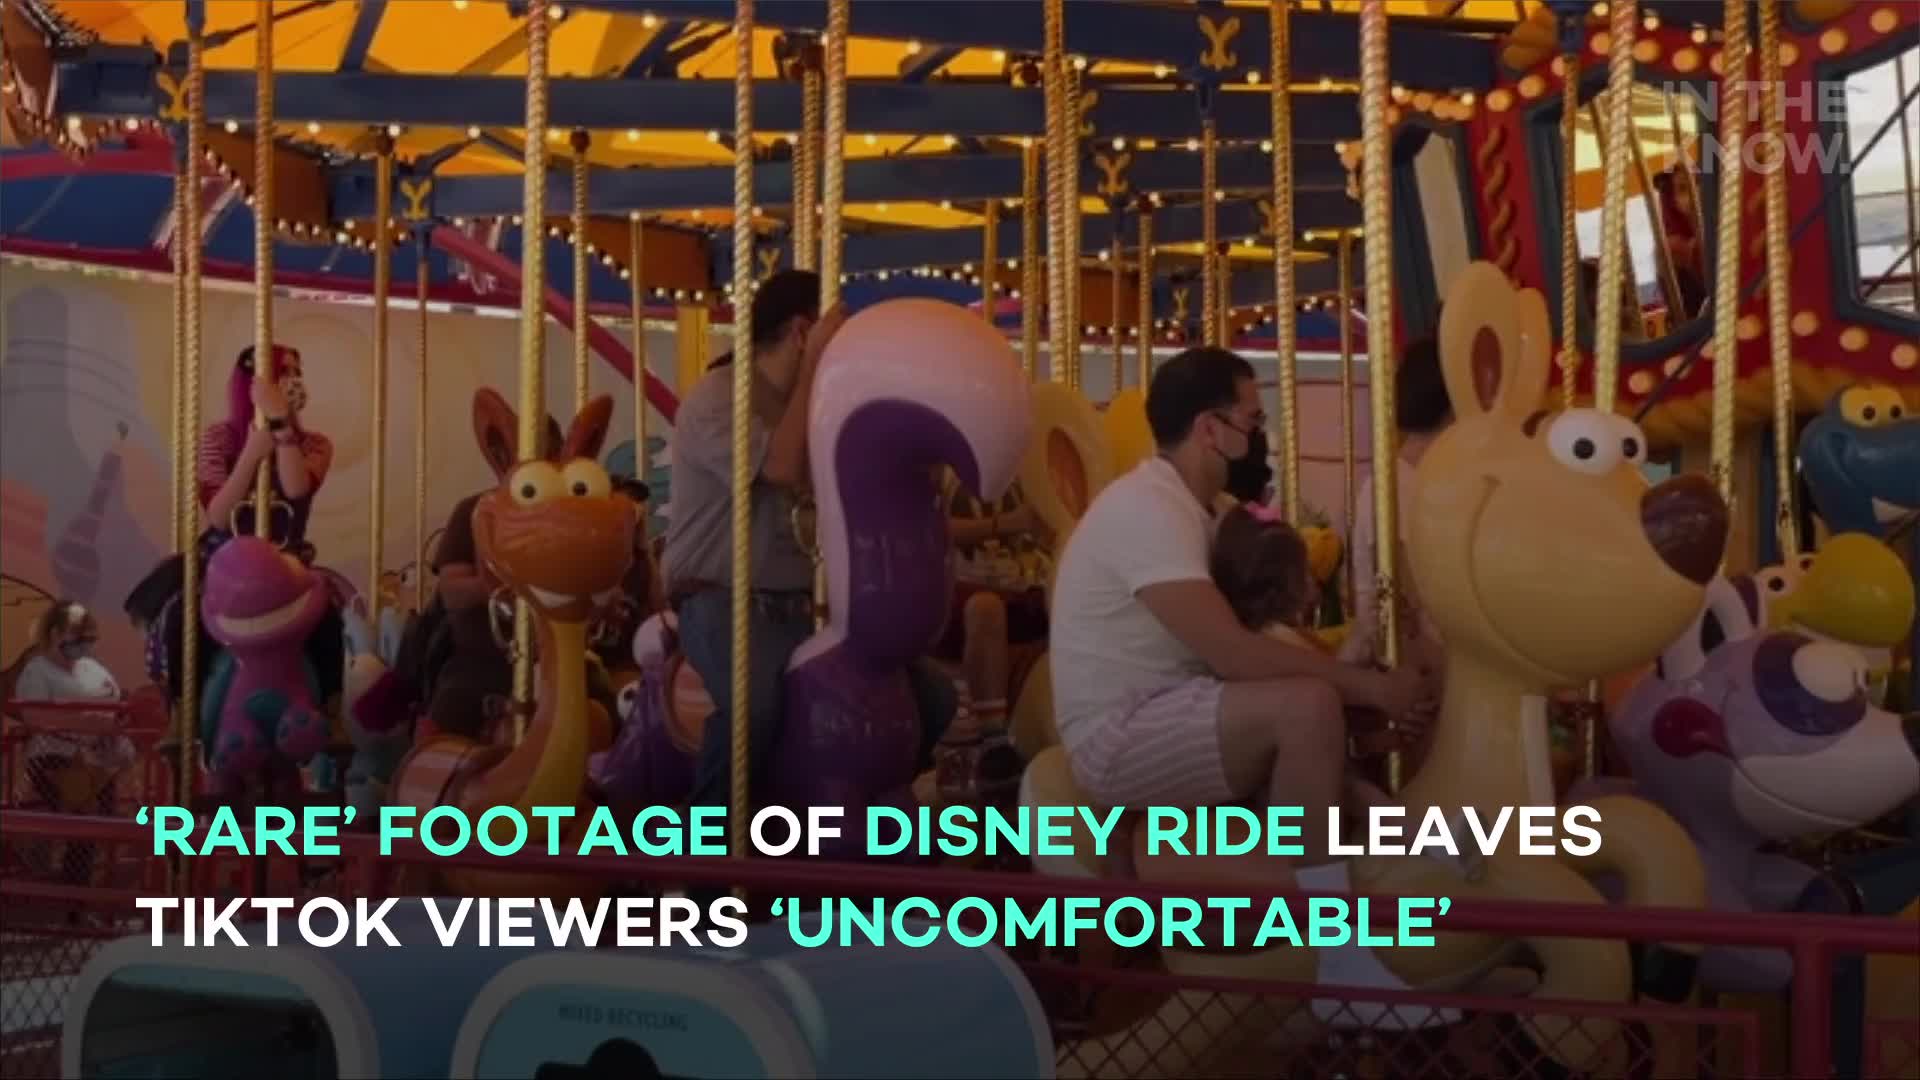 Disney Dark Ride Evacuated, Somehow Just as Terrifying With the Lights On